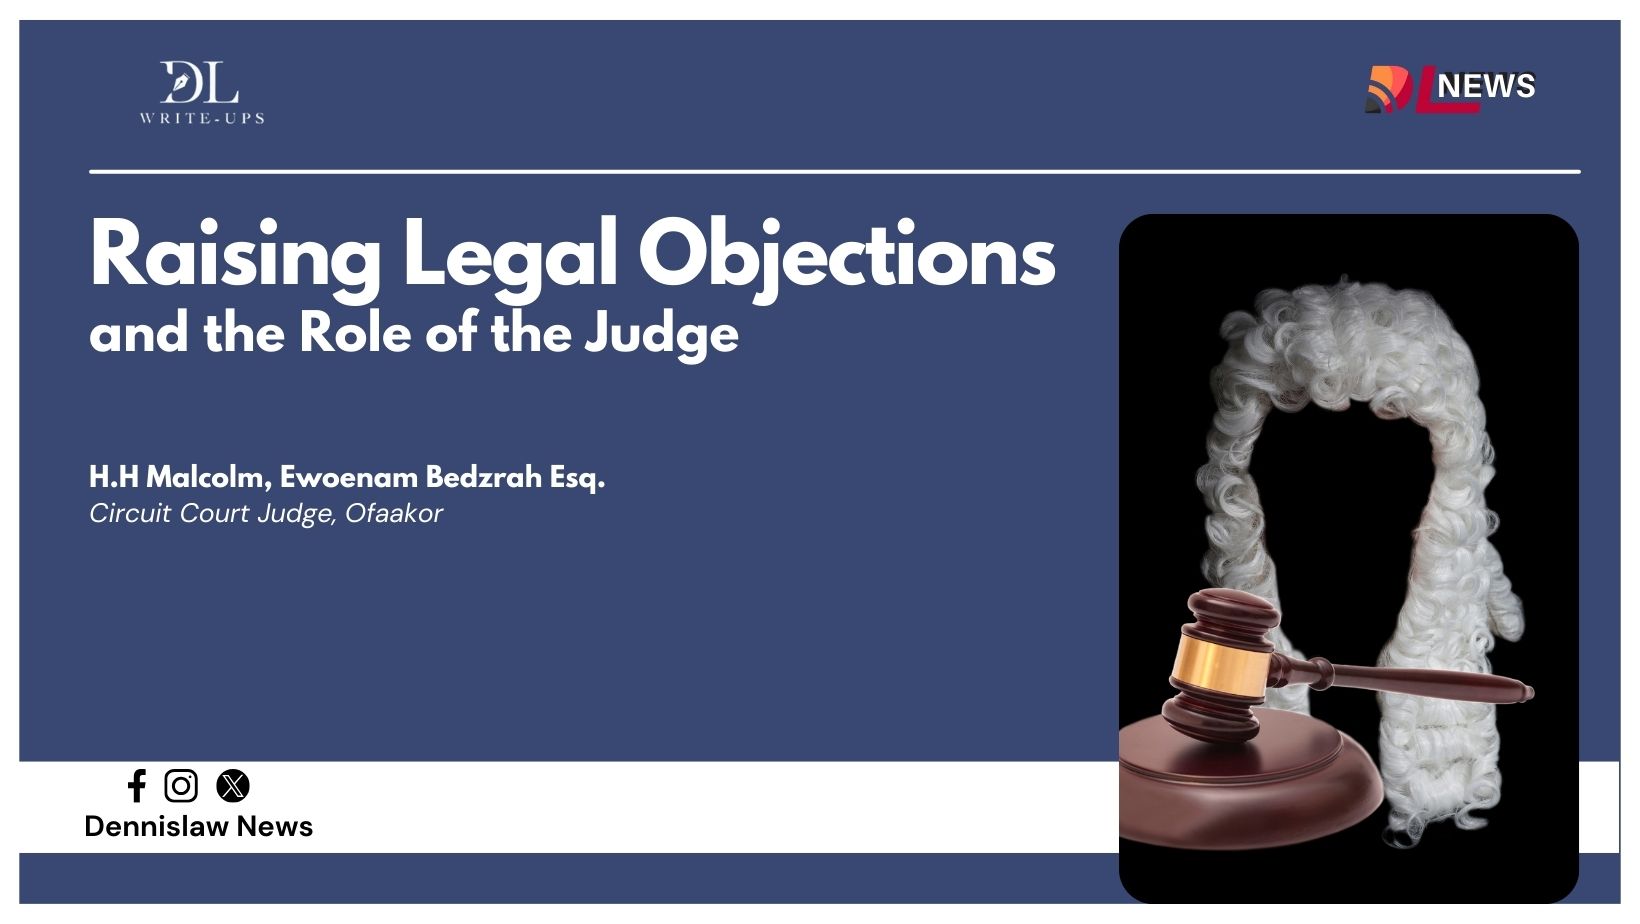 Raising Legal Objections and the Role of the Judge